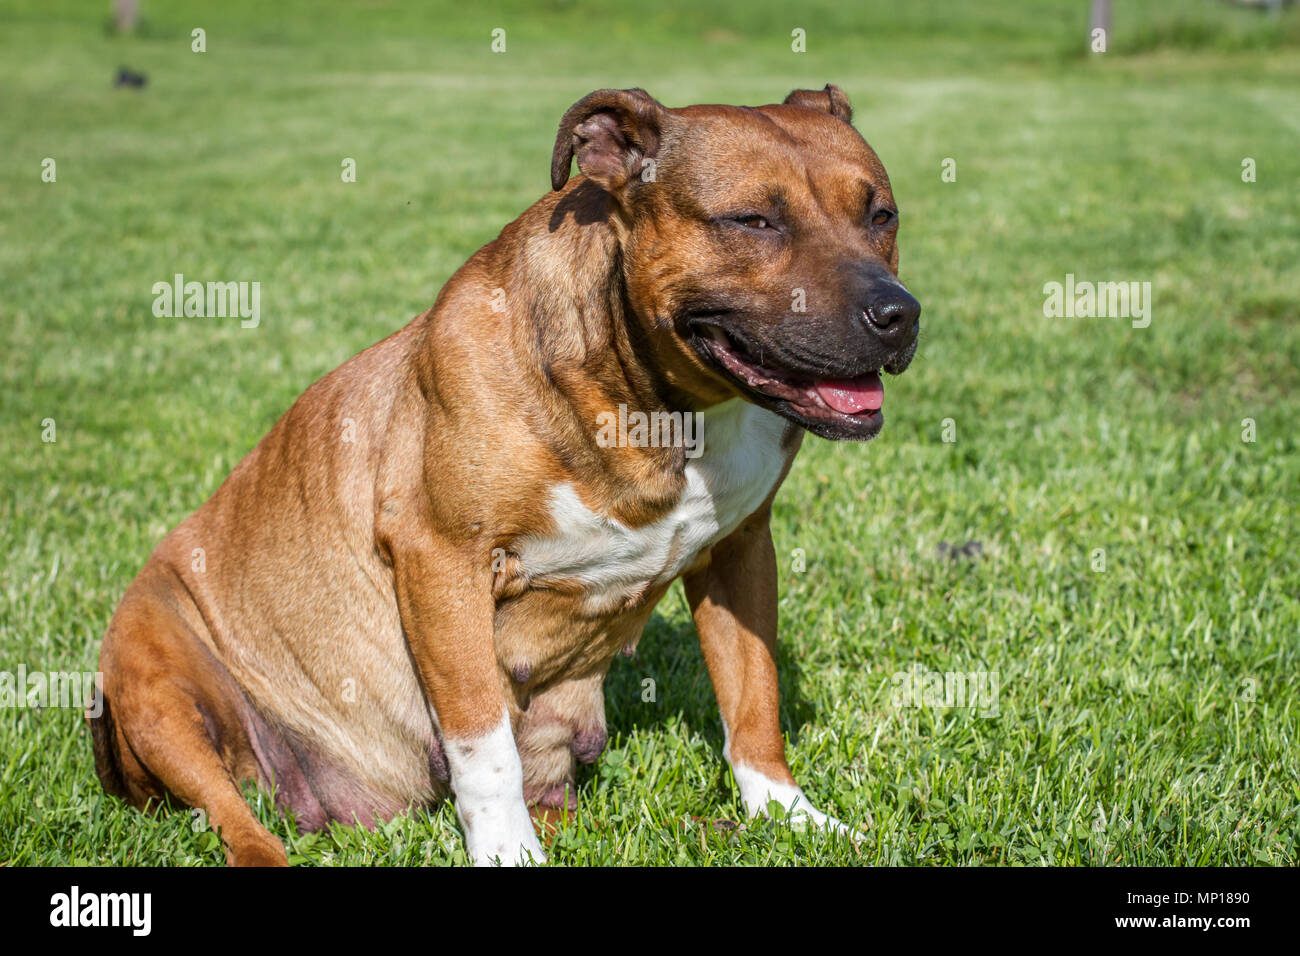 Gravid female dog sitting on a meadow Stock Photo